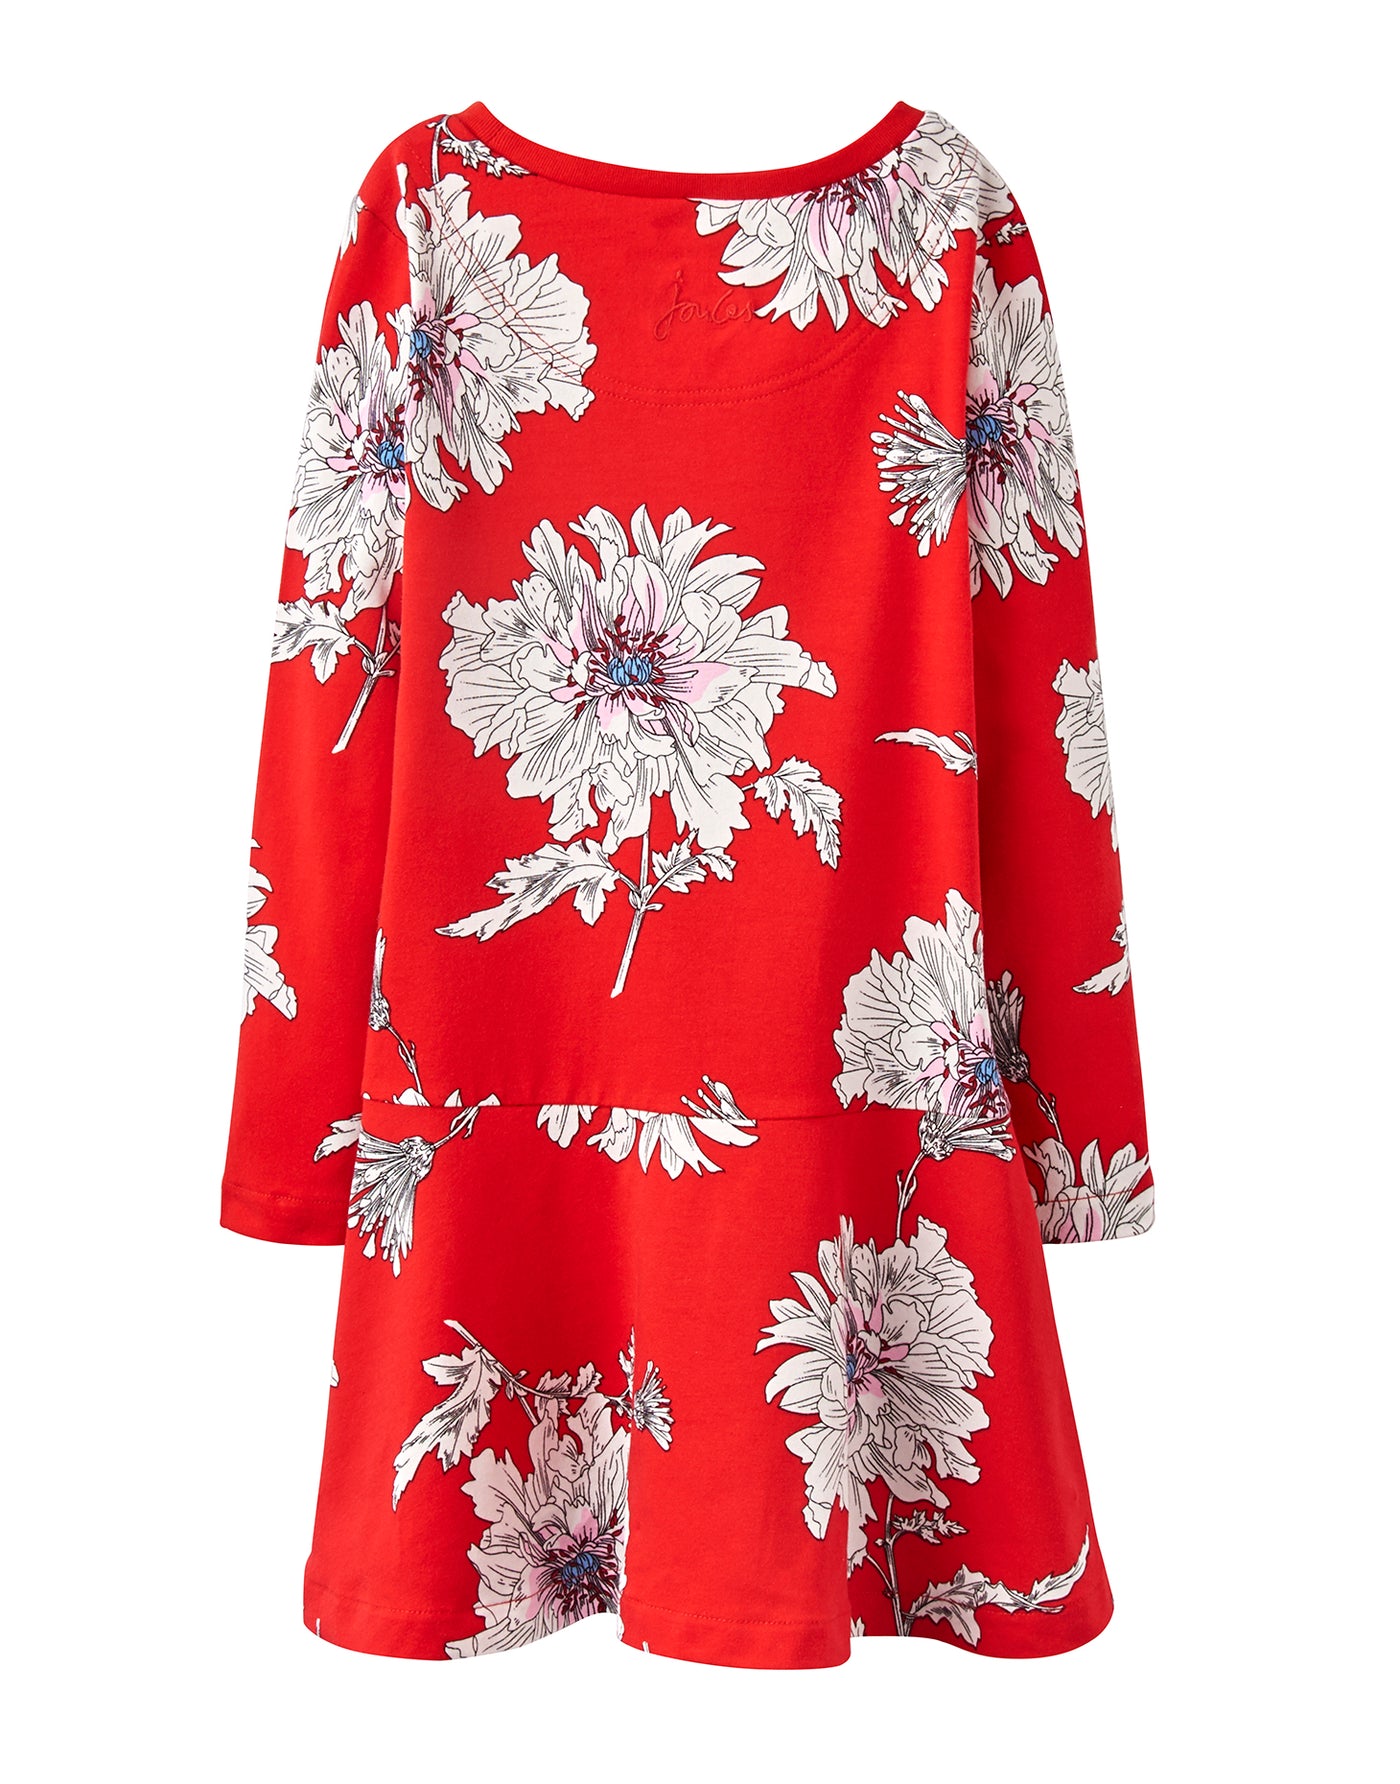 Joules Trapeze Dress - Red Peony Floral